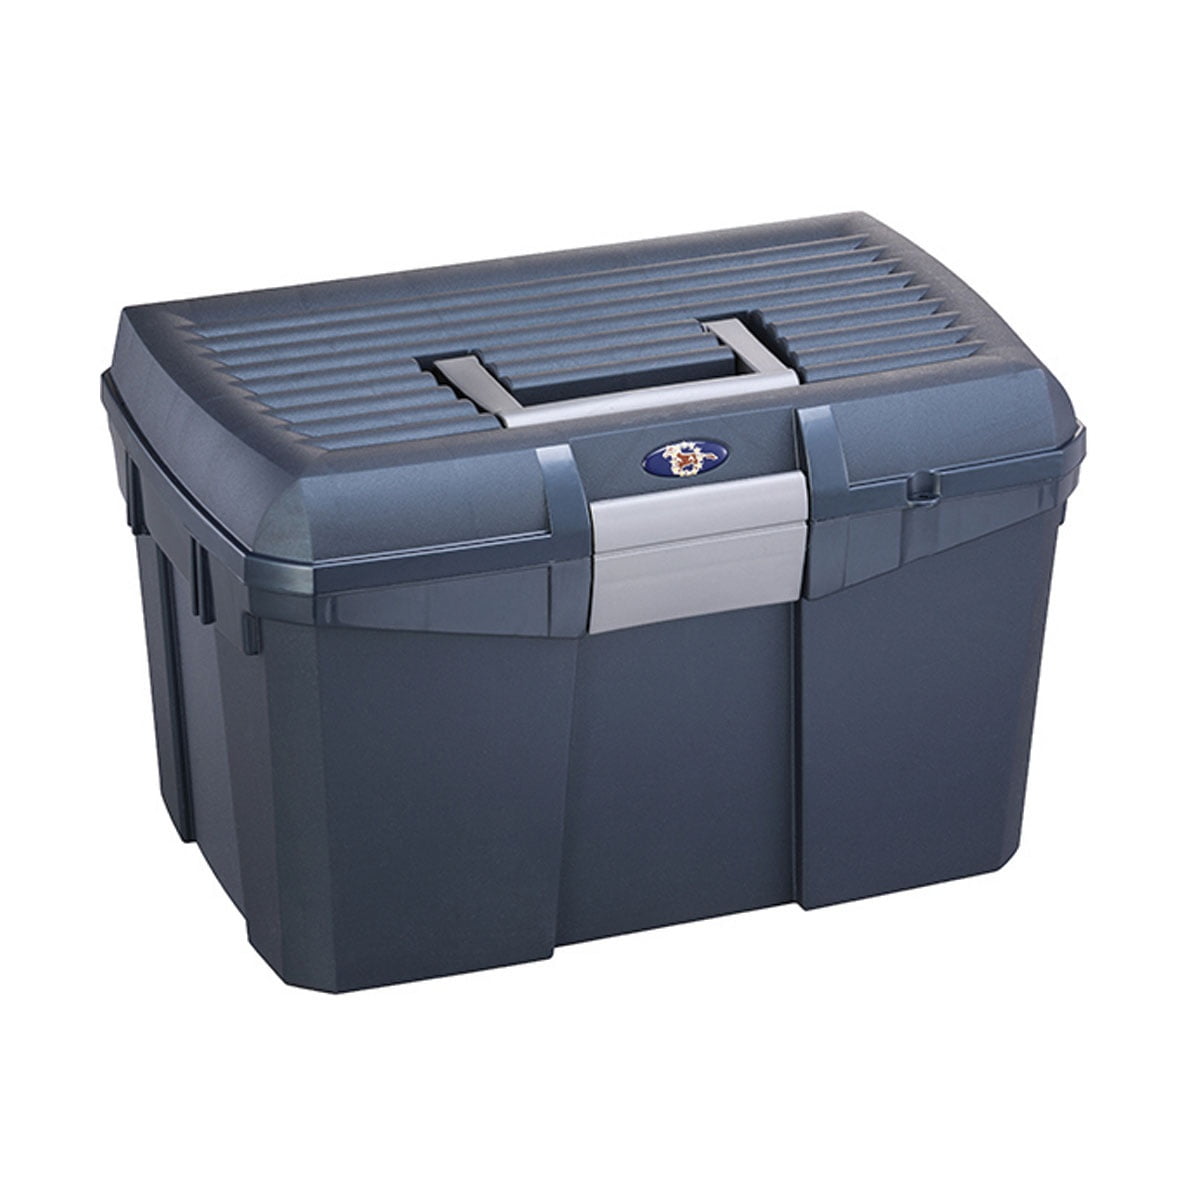 Lincoln Easi Step & Carry Tack Box